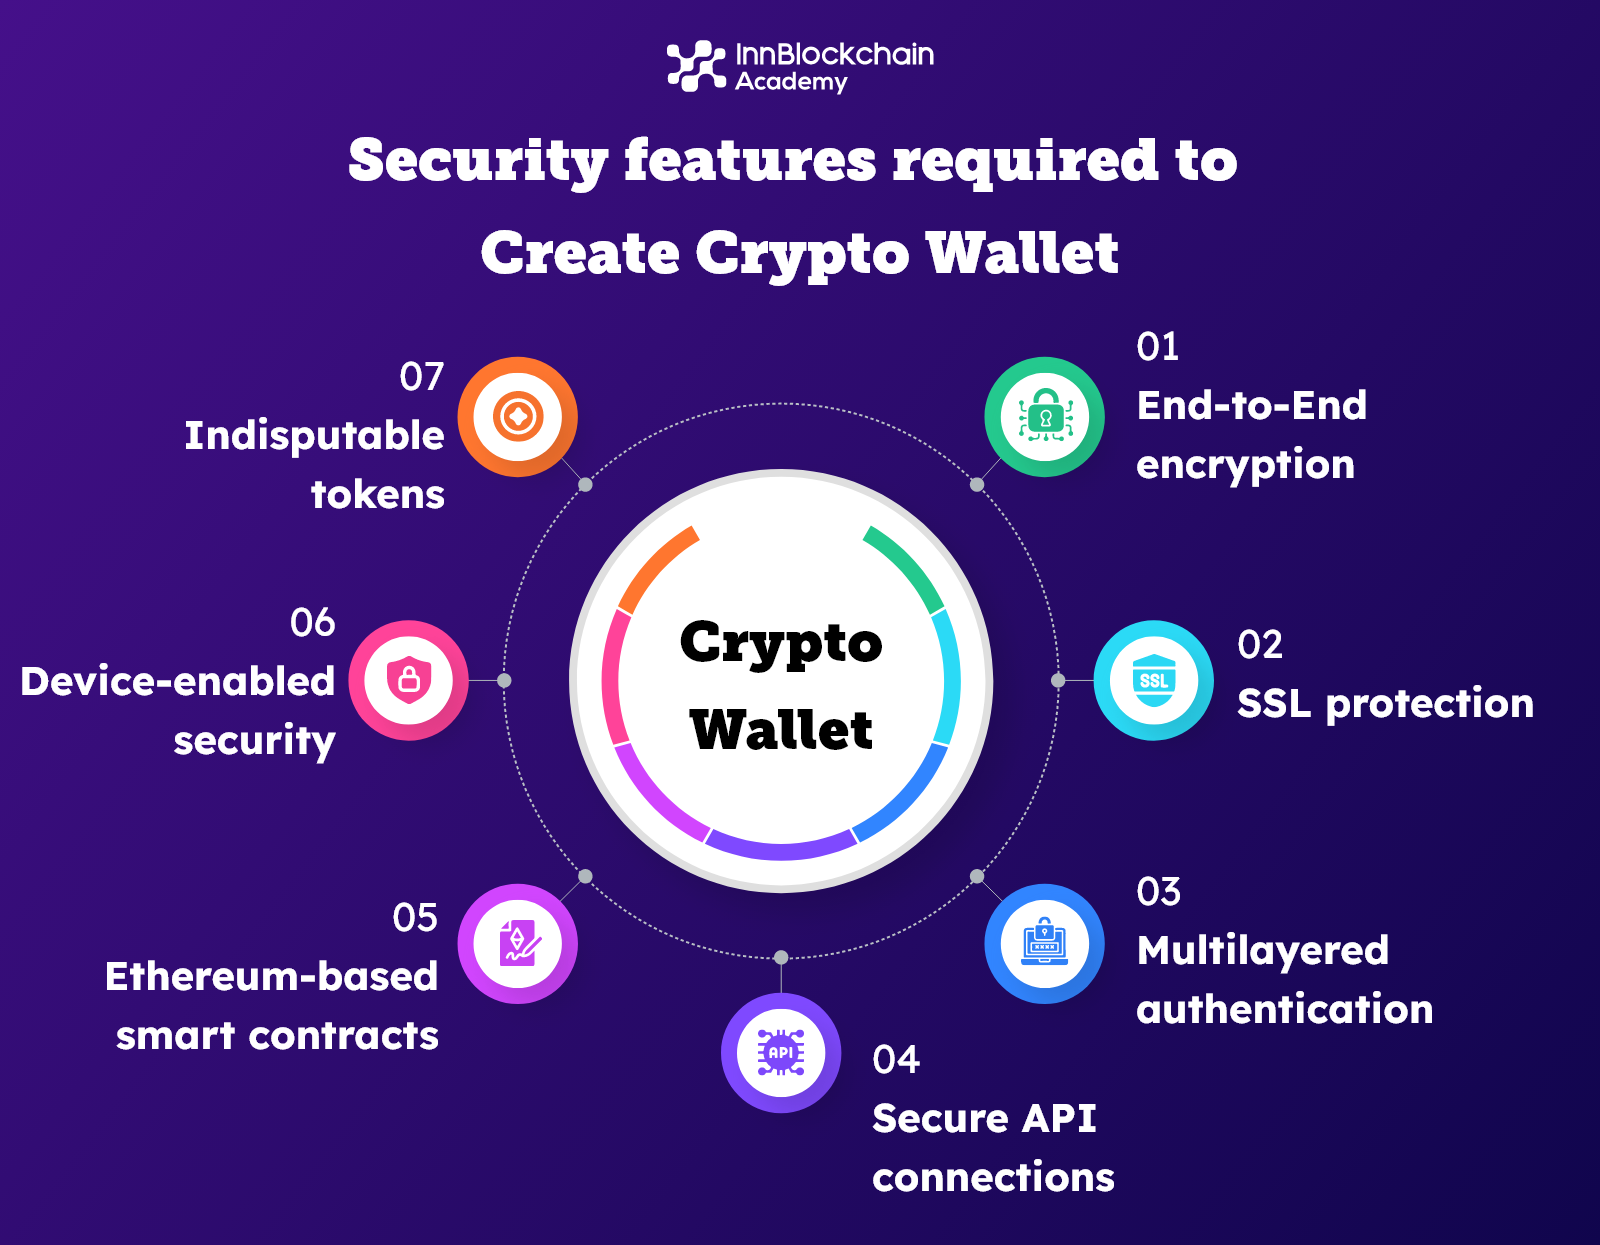 Security features to create crypto wallet